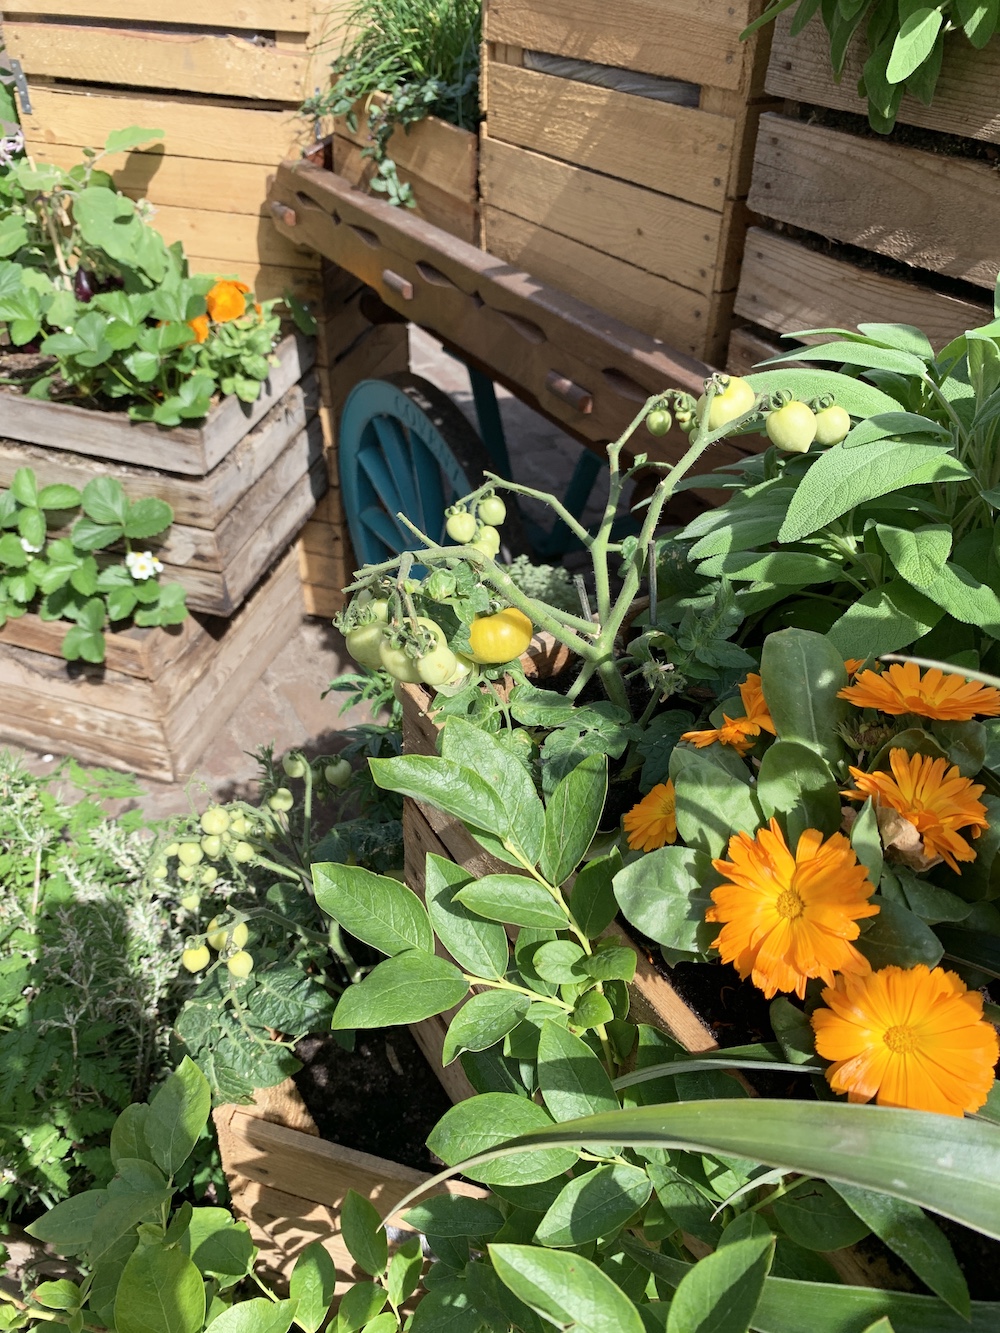 Crate Gardening for Small Spaces Top View of Wagon Tomatoes #Garden #Gardening #SmallSpace #SmallSpaceGardening #ContainerGardening #VegetableGarden #HerbGarden #PorchGarden #PatioGarden 